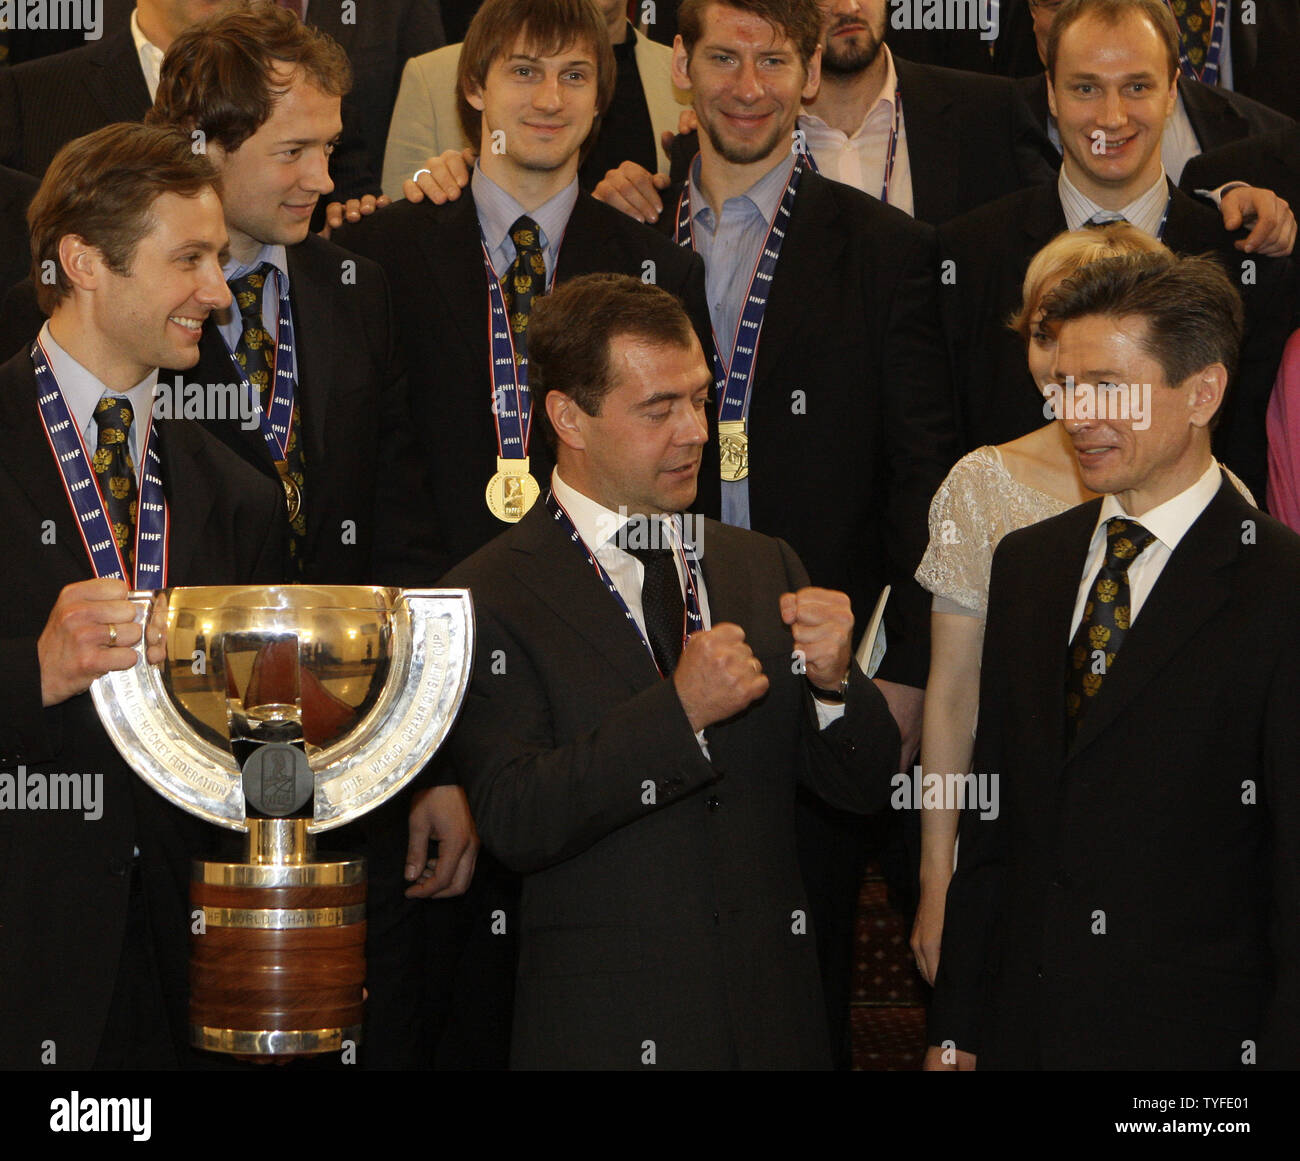 Russian President Dmitry Medvedev (C) talks to coach Vyacheslav Bykov as captain Alexei Morozov (L) holds the World Hockey Championships during a meeting with the national ice hockey team in the Kremlin in Moscow on May 12, 2009. In the final match on Sunday Russia beat Canada 2-1 and won the gold-medal of the ice hockey world championships. (UPI Photo/Anatoli Zhdanov) Stock Photo